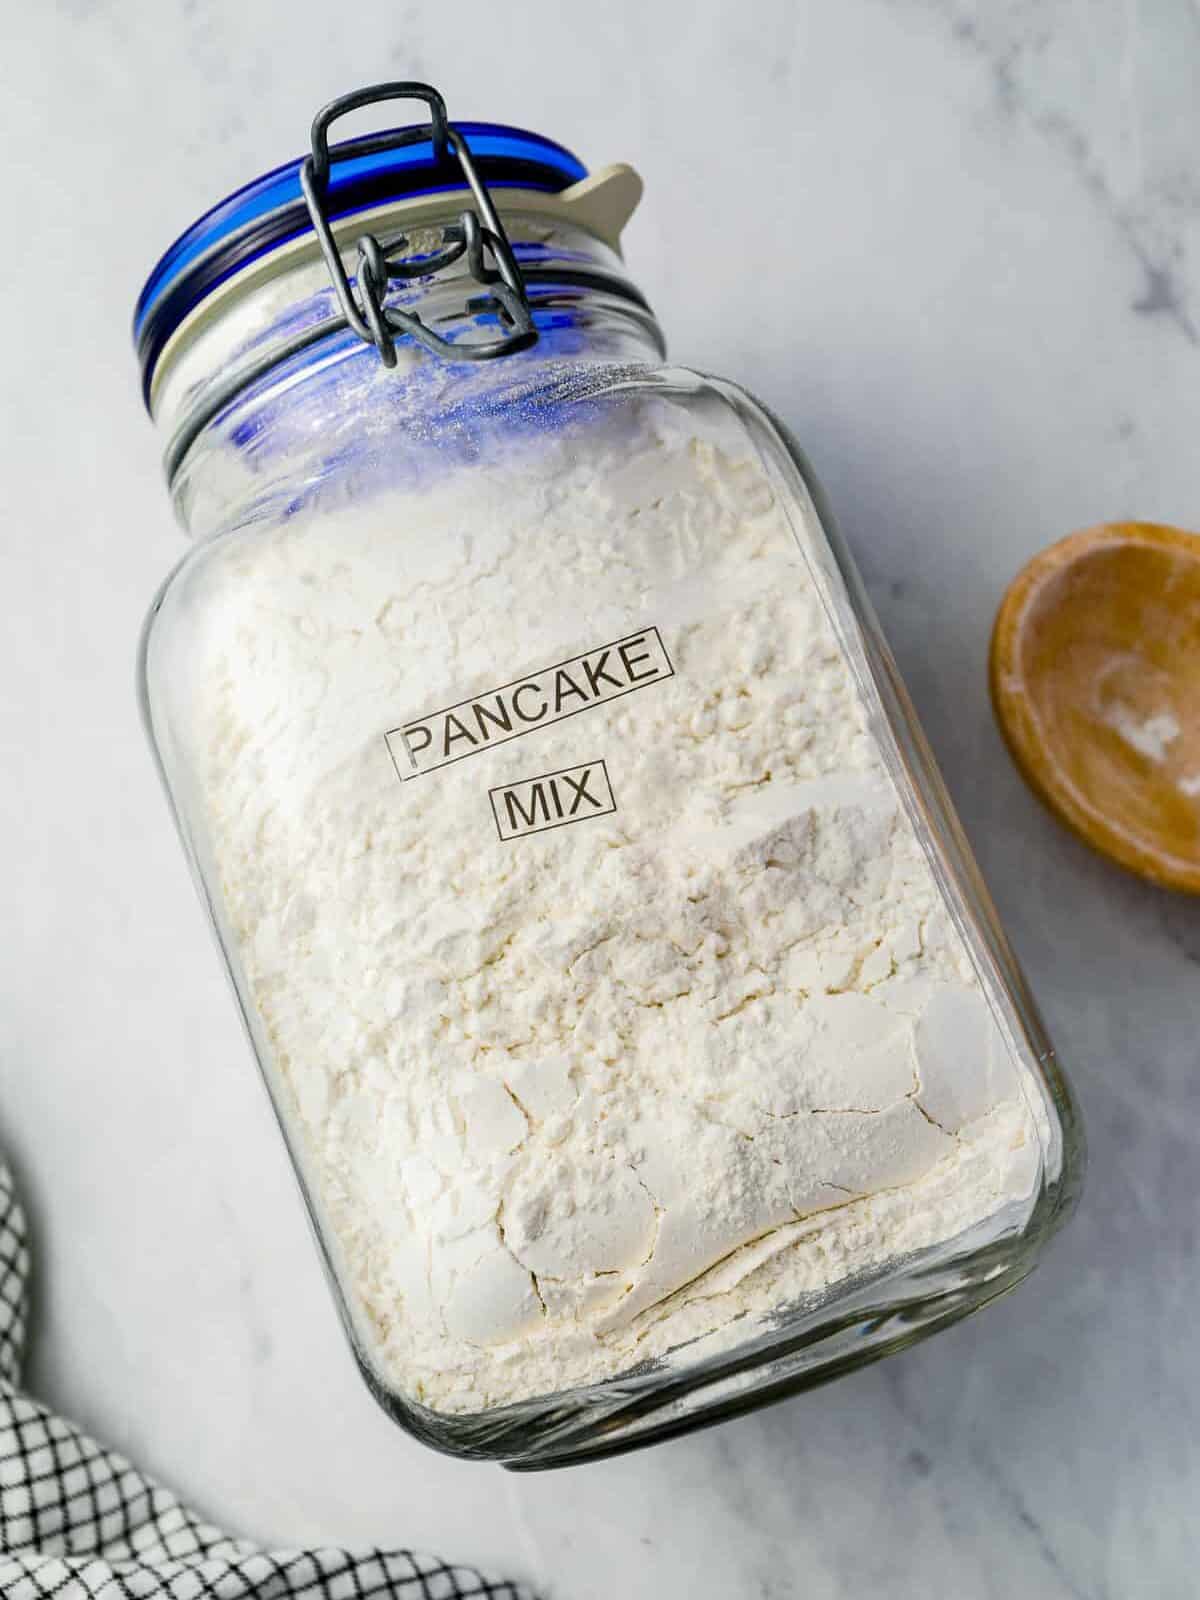 overhead view of a glass jar full of homemade pancake mix on its side with the label "pancake mix".